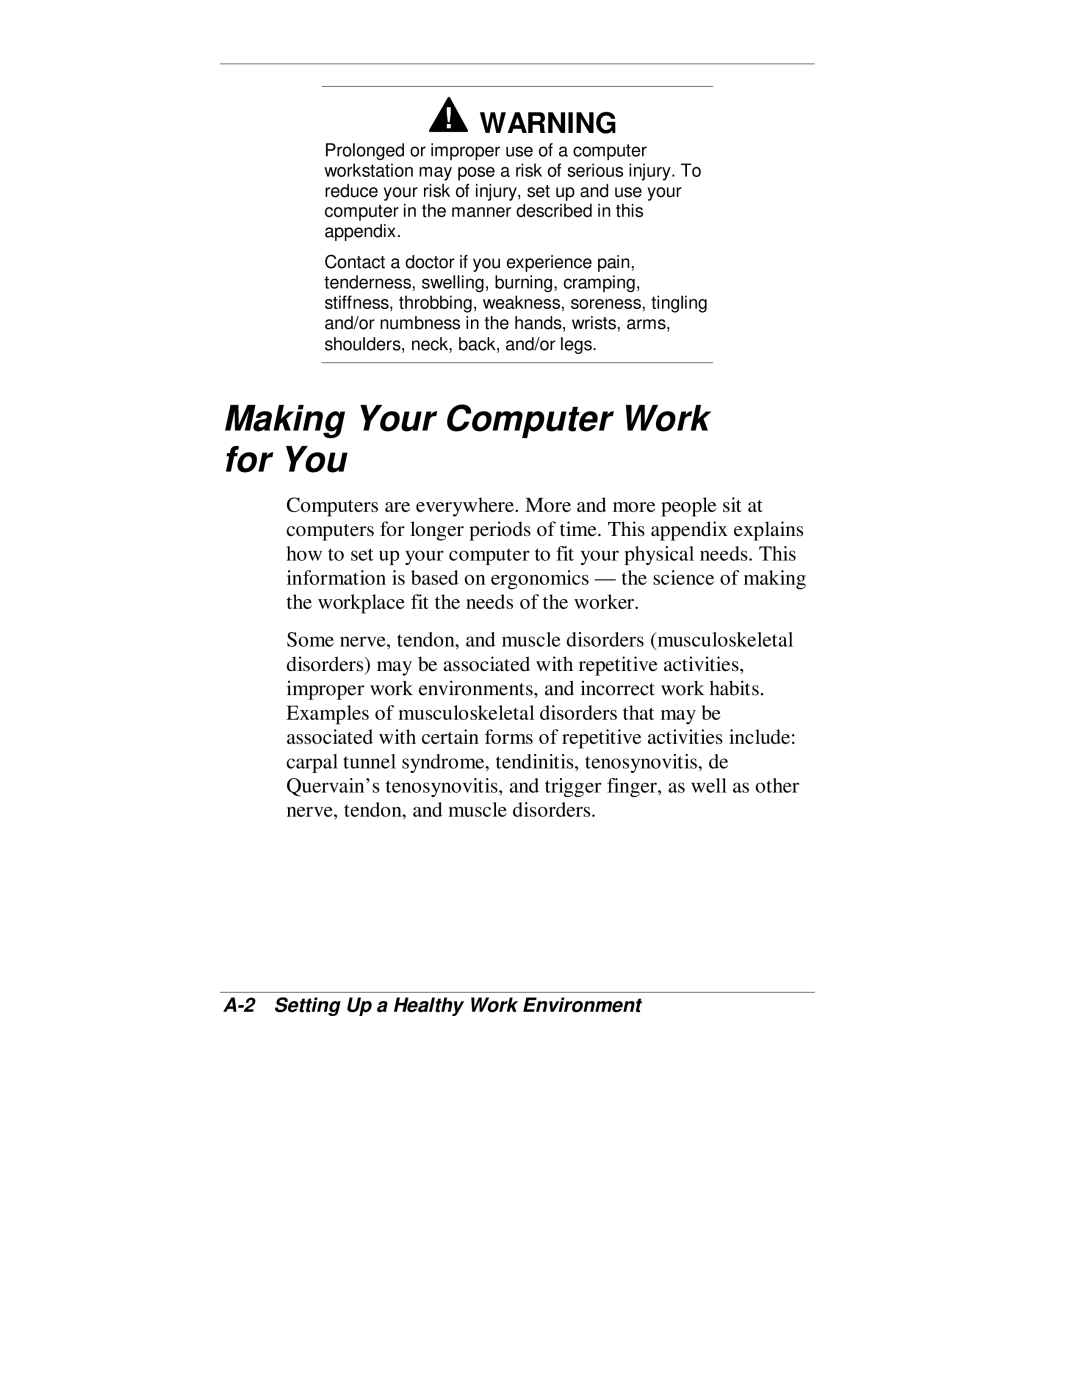 NEC VT 300 Series manual Making Your Computer Work for You, A-2Setting Up a Healthy Work Environment 